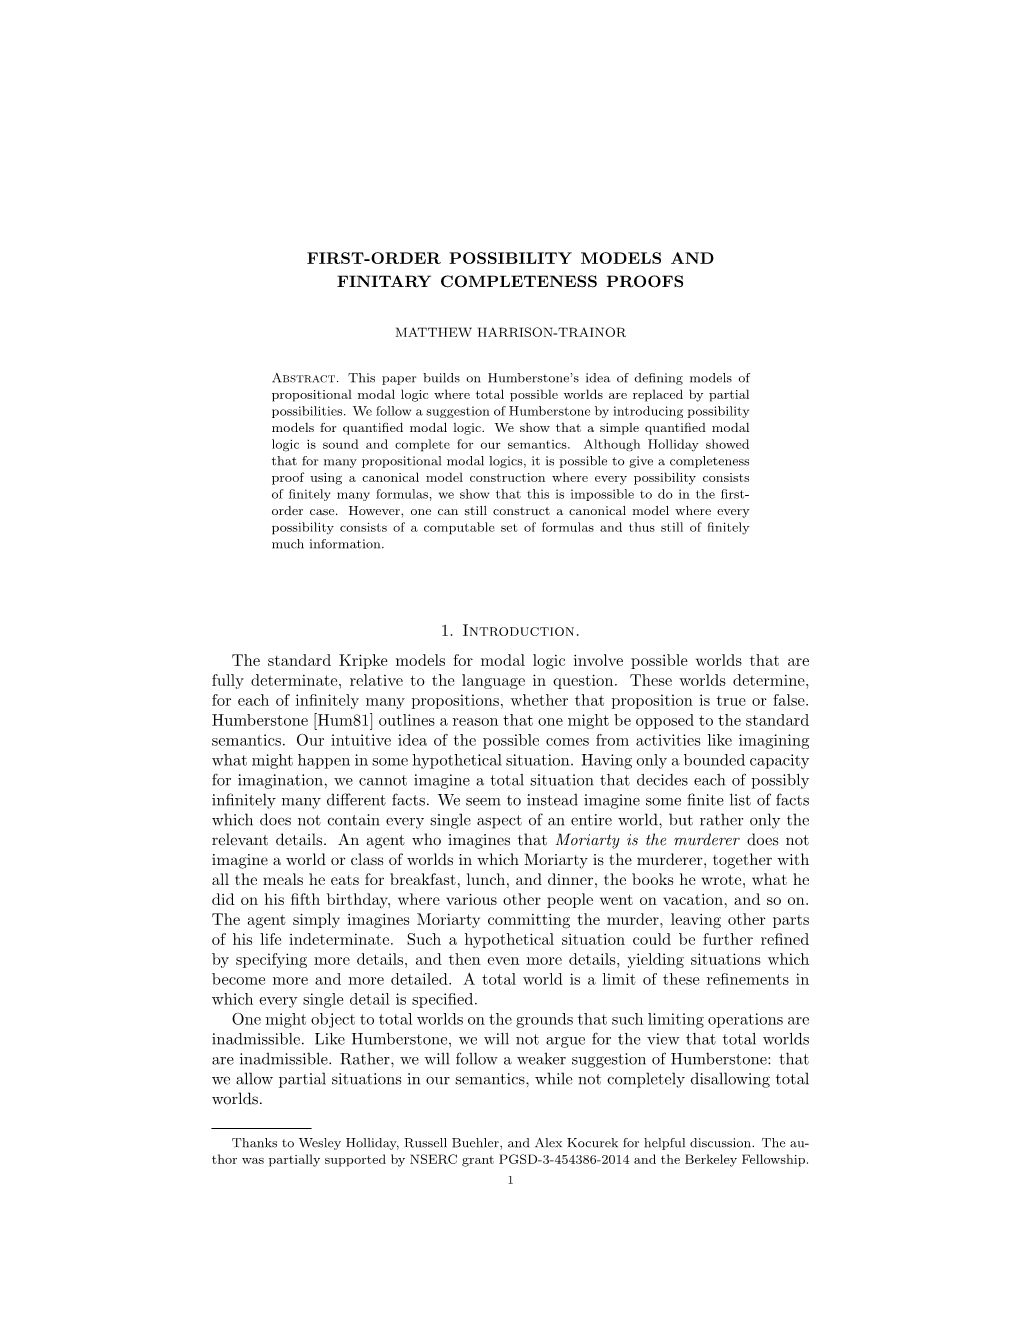 First-Order Possibility Models and Finitary Completeness Proofs